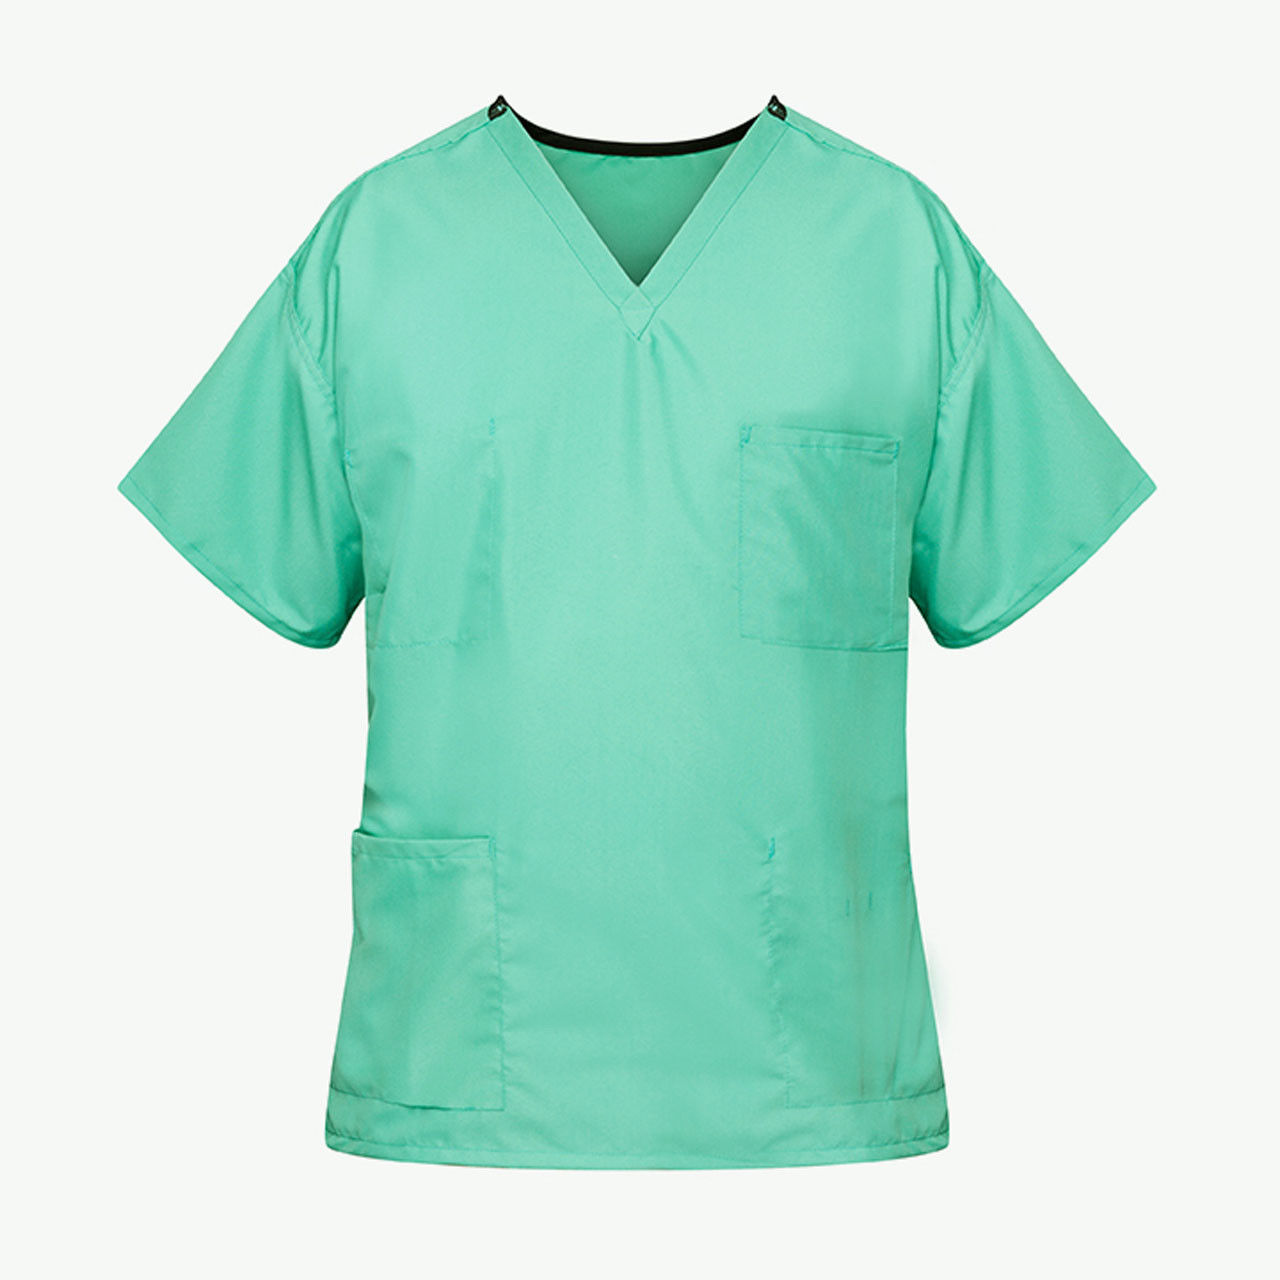 What is the size guide for these jade green scrubs?